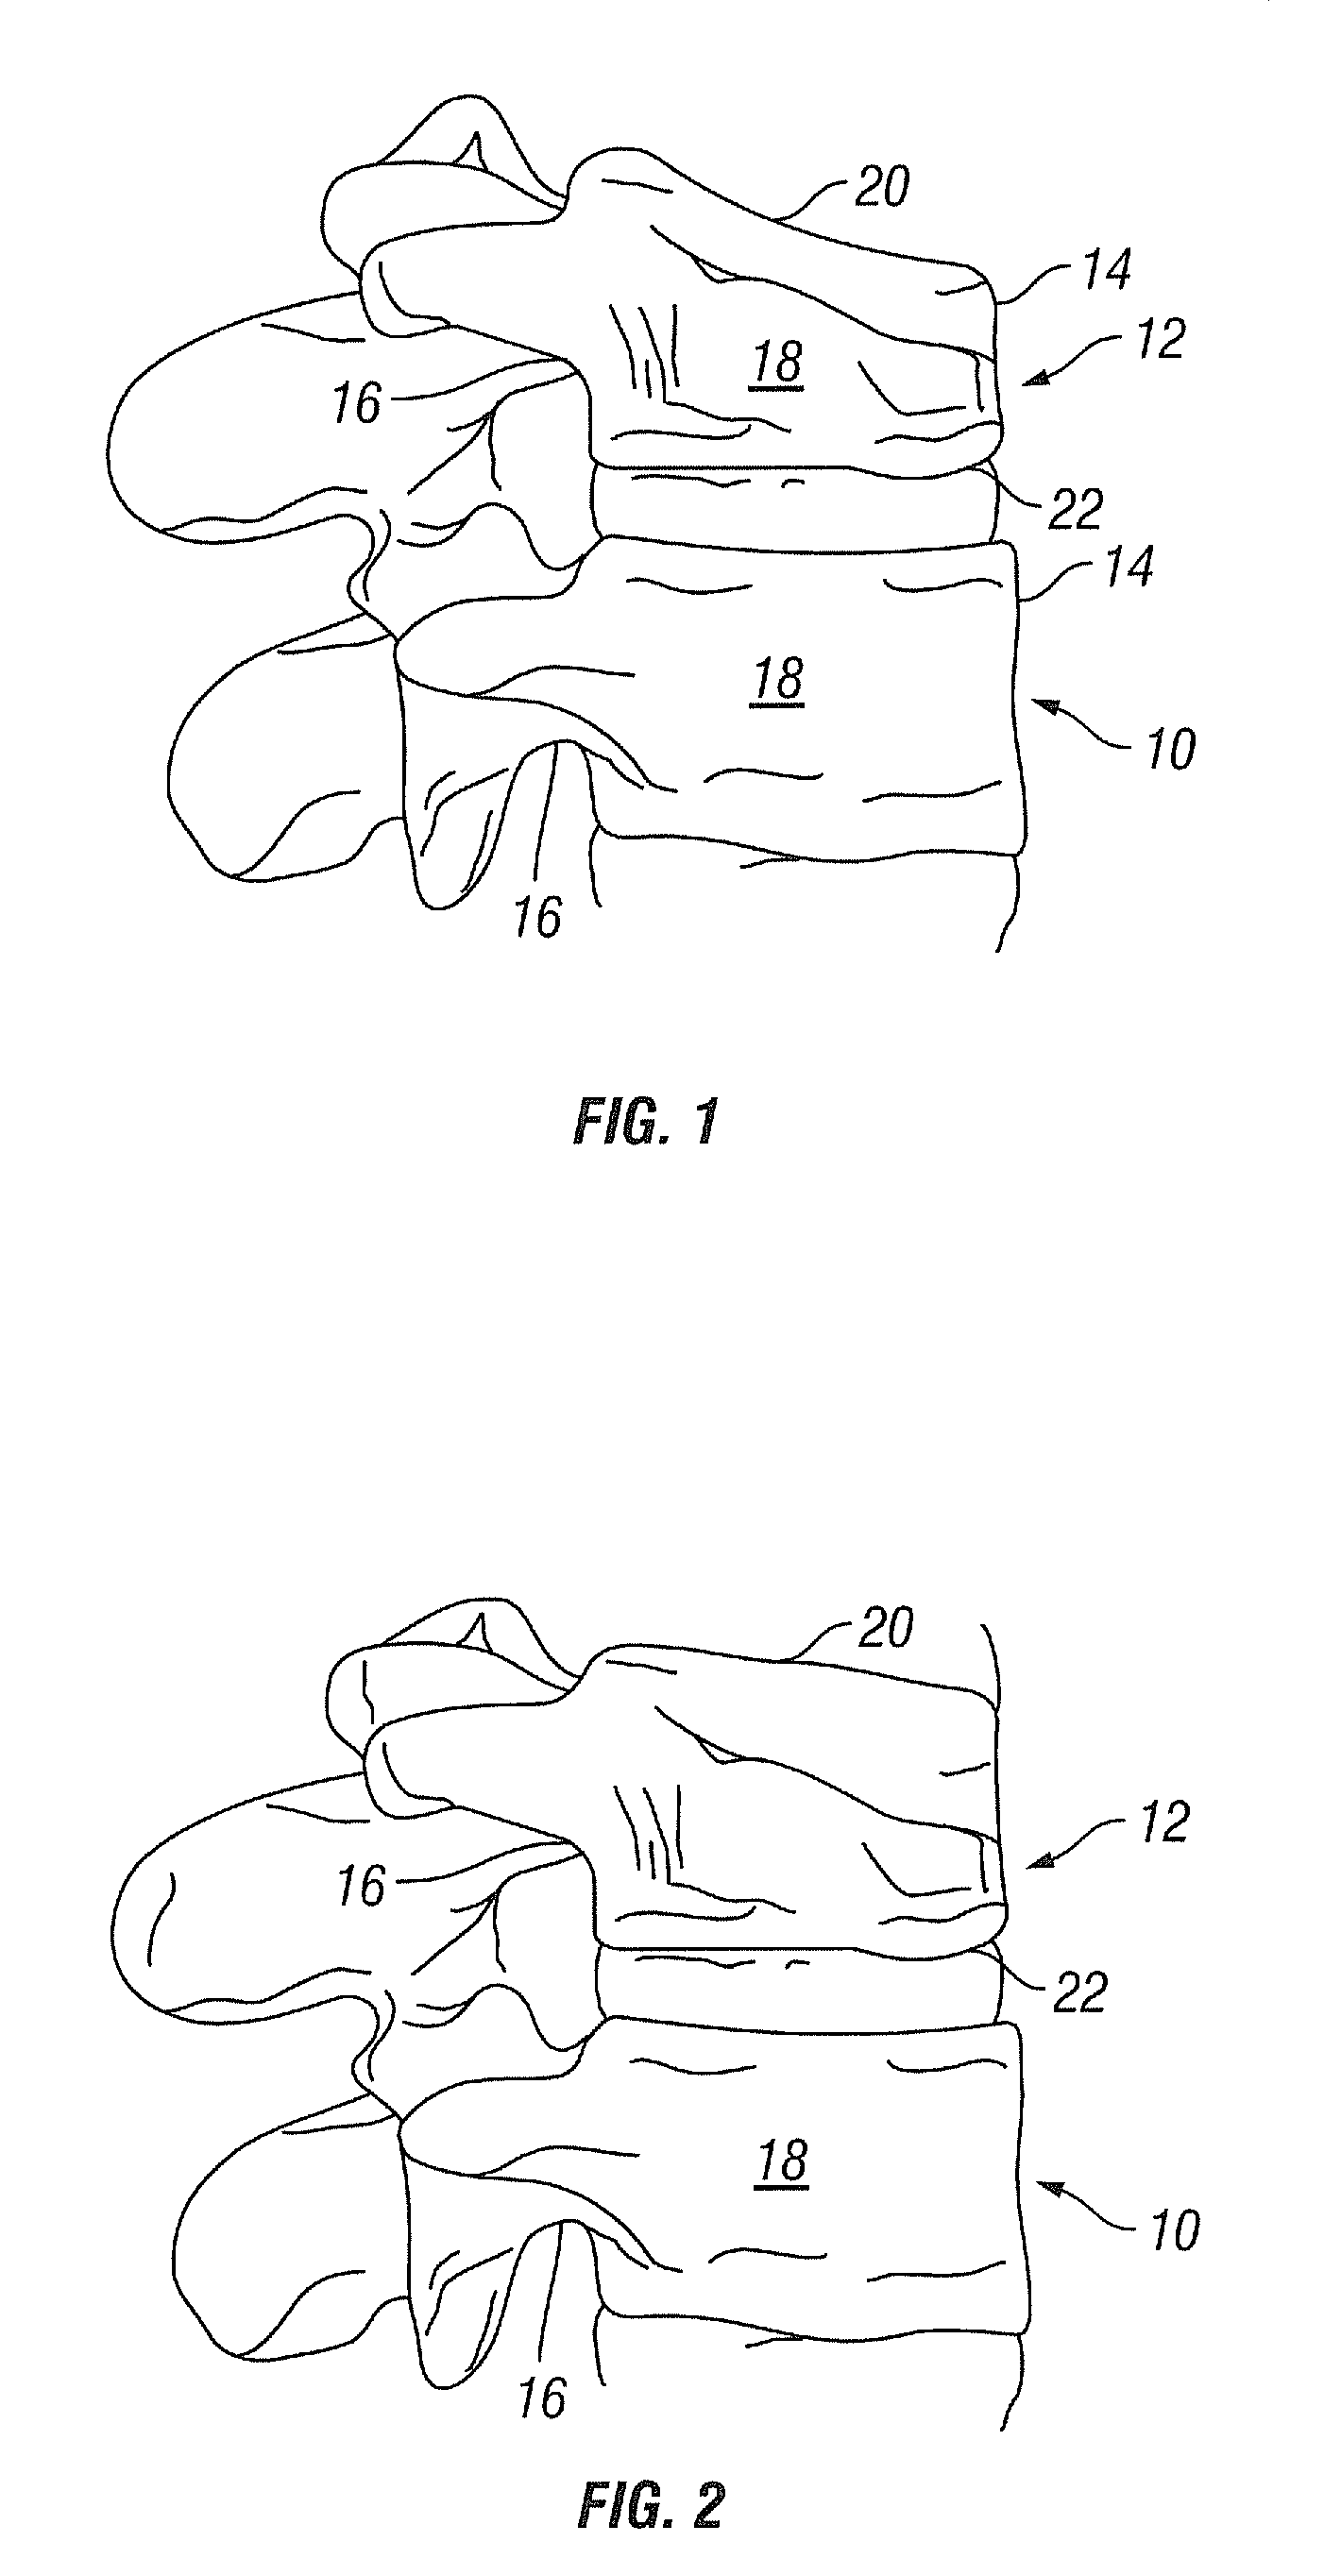 Devices and methods for treating vertebral fractures